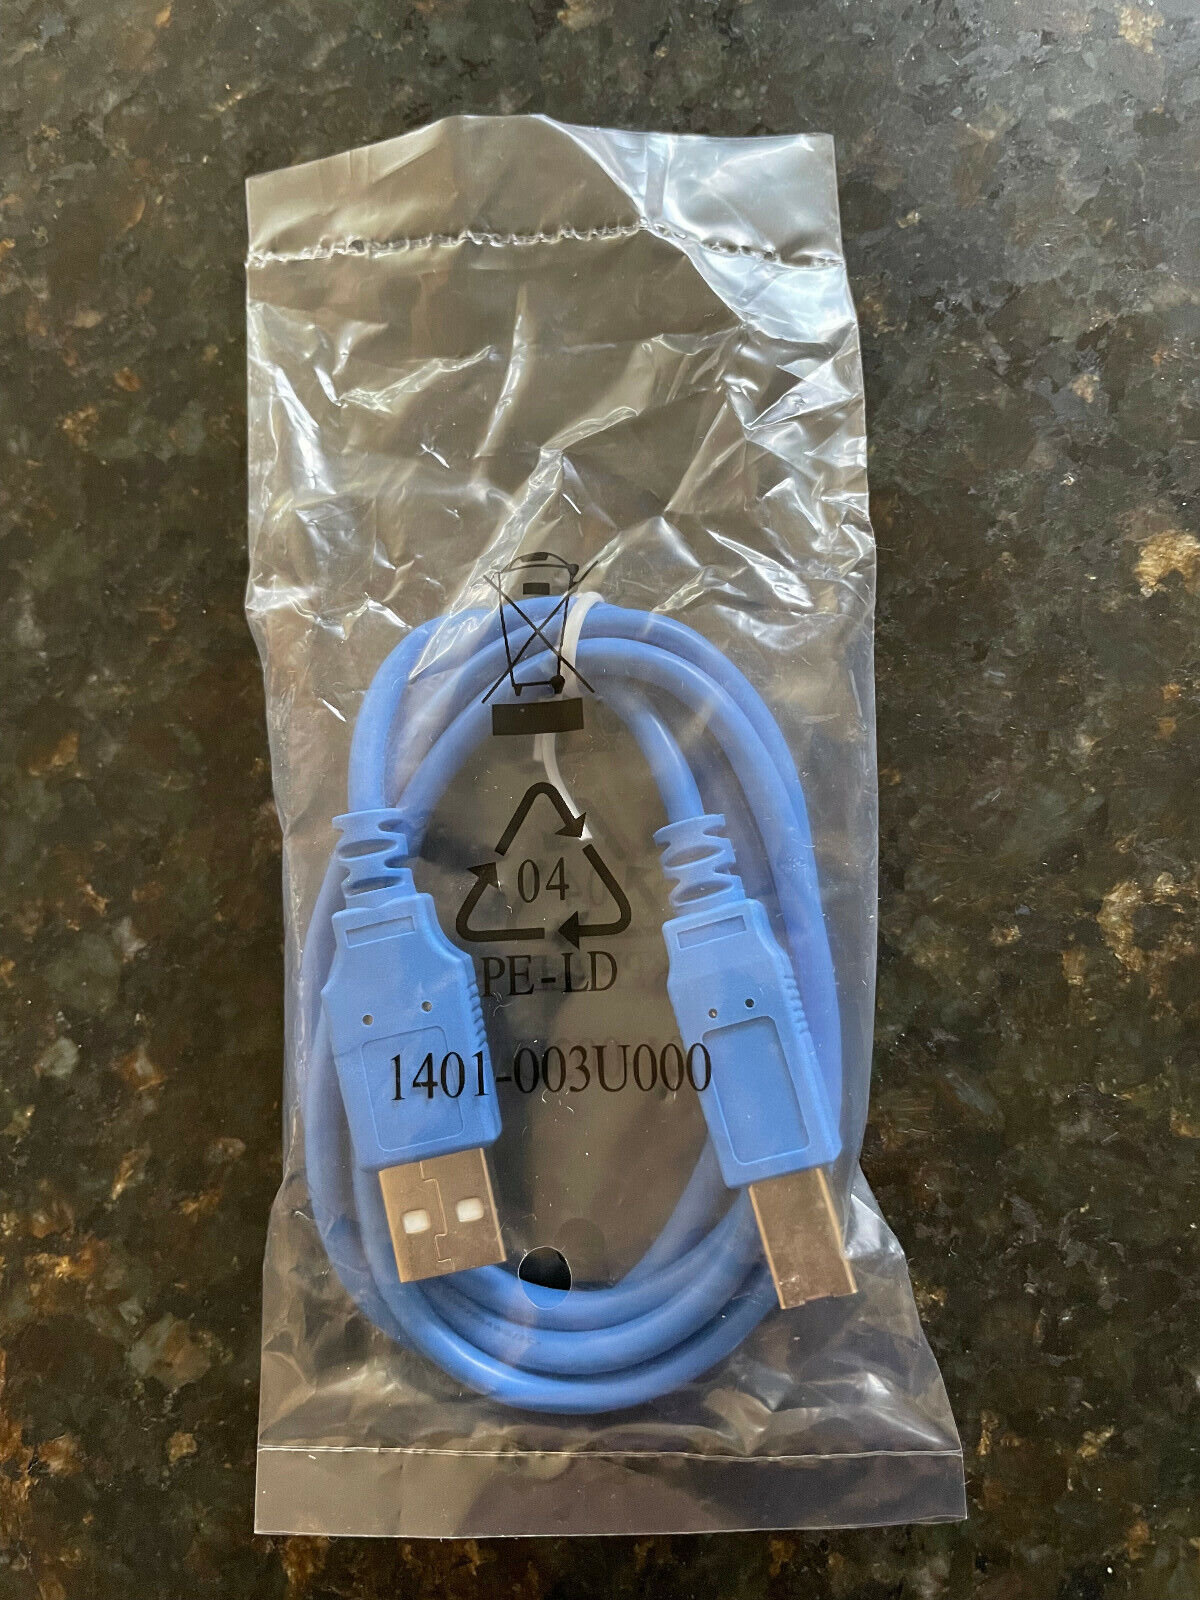 Cable - COPARTNER 1401-003U000 New in Package Blue PE-LD Approximately 3 Feet